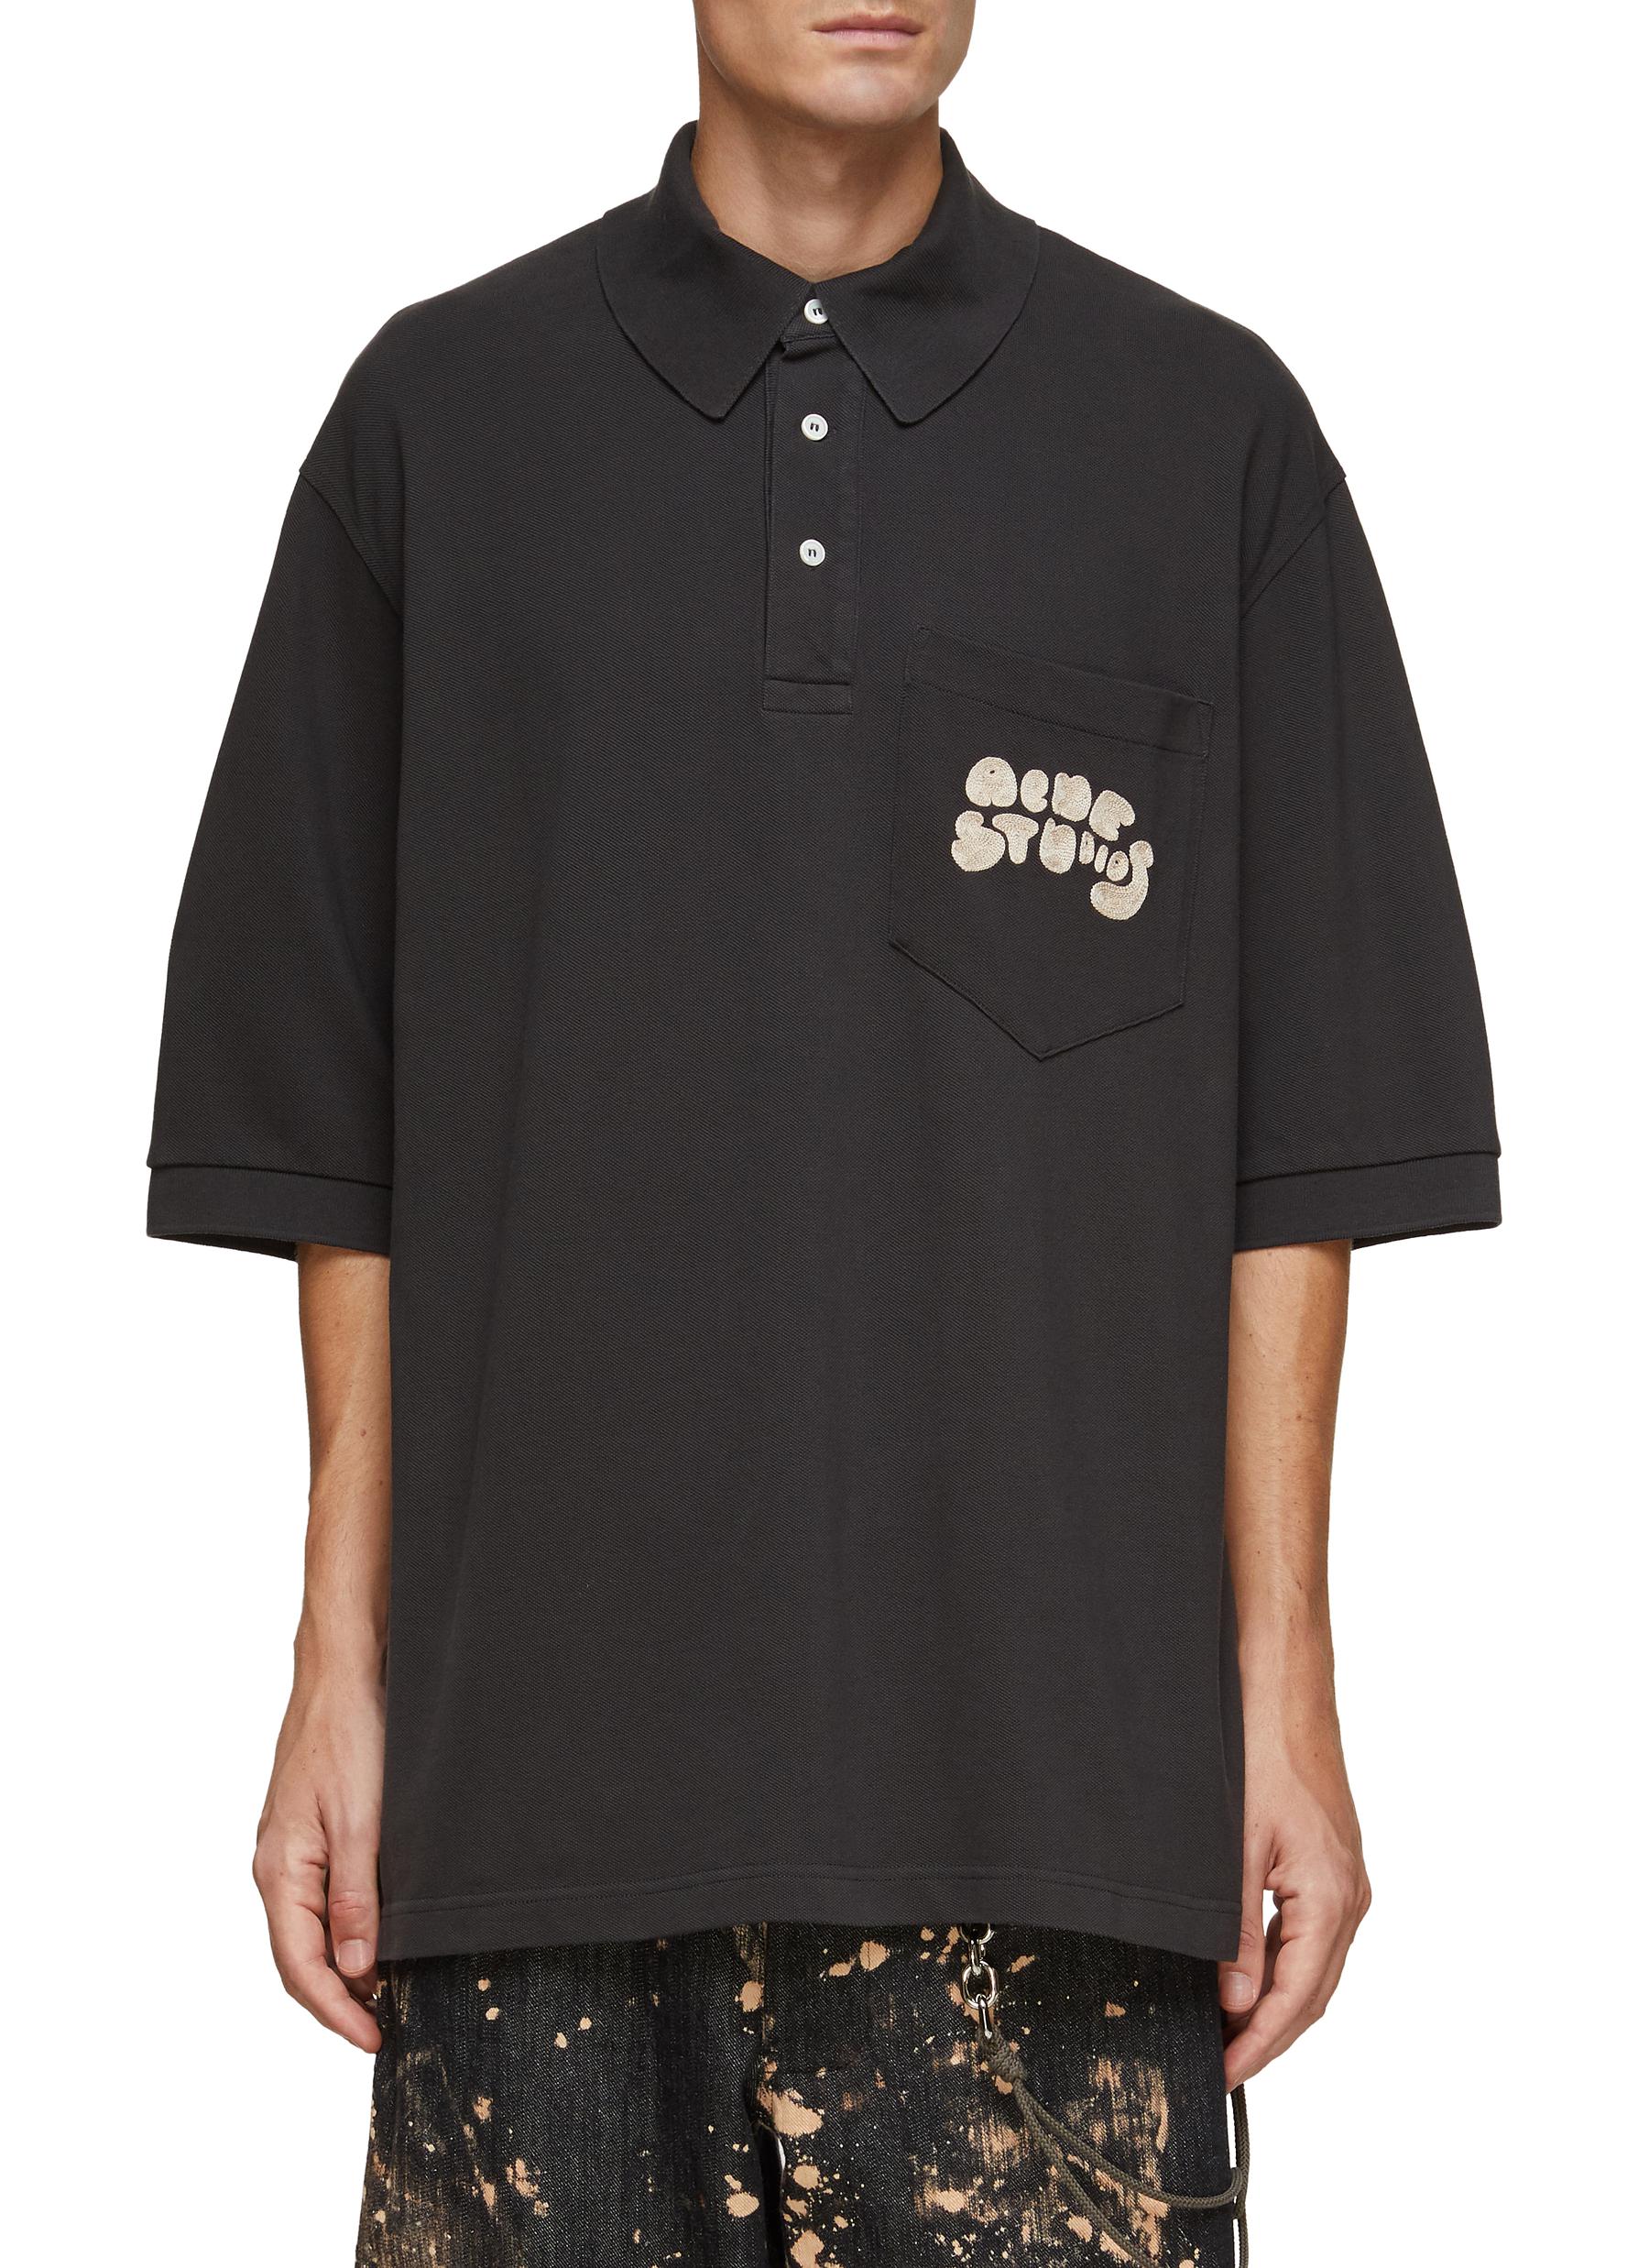 ACNE STUDIOS CHAIN STITCH EMBROIDERY CHEST POCKET PIQUE POLO SHIRT